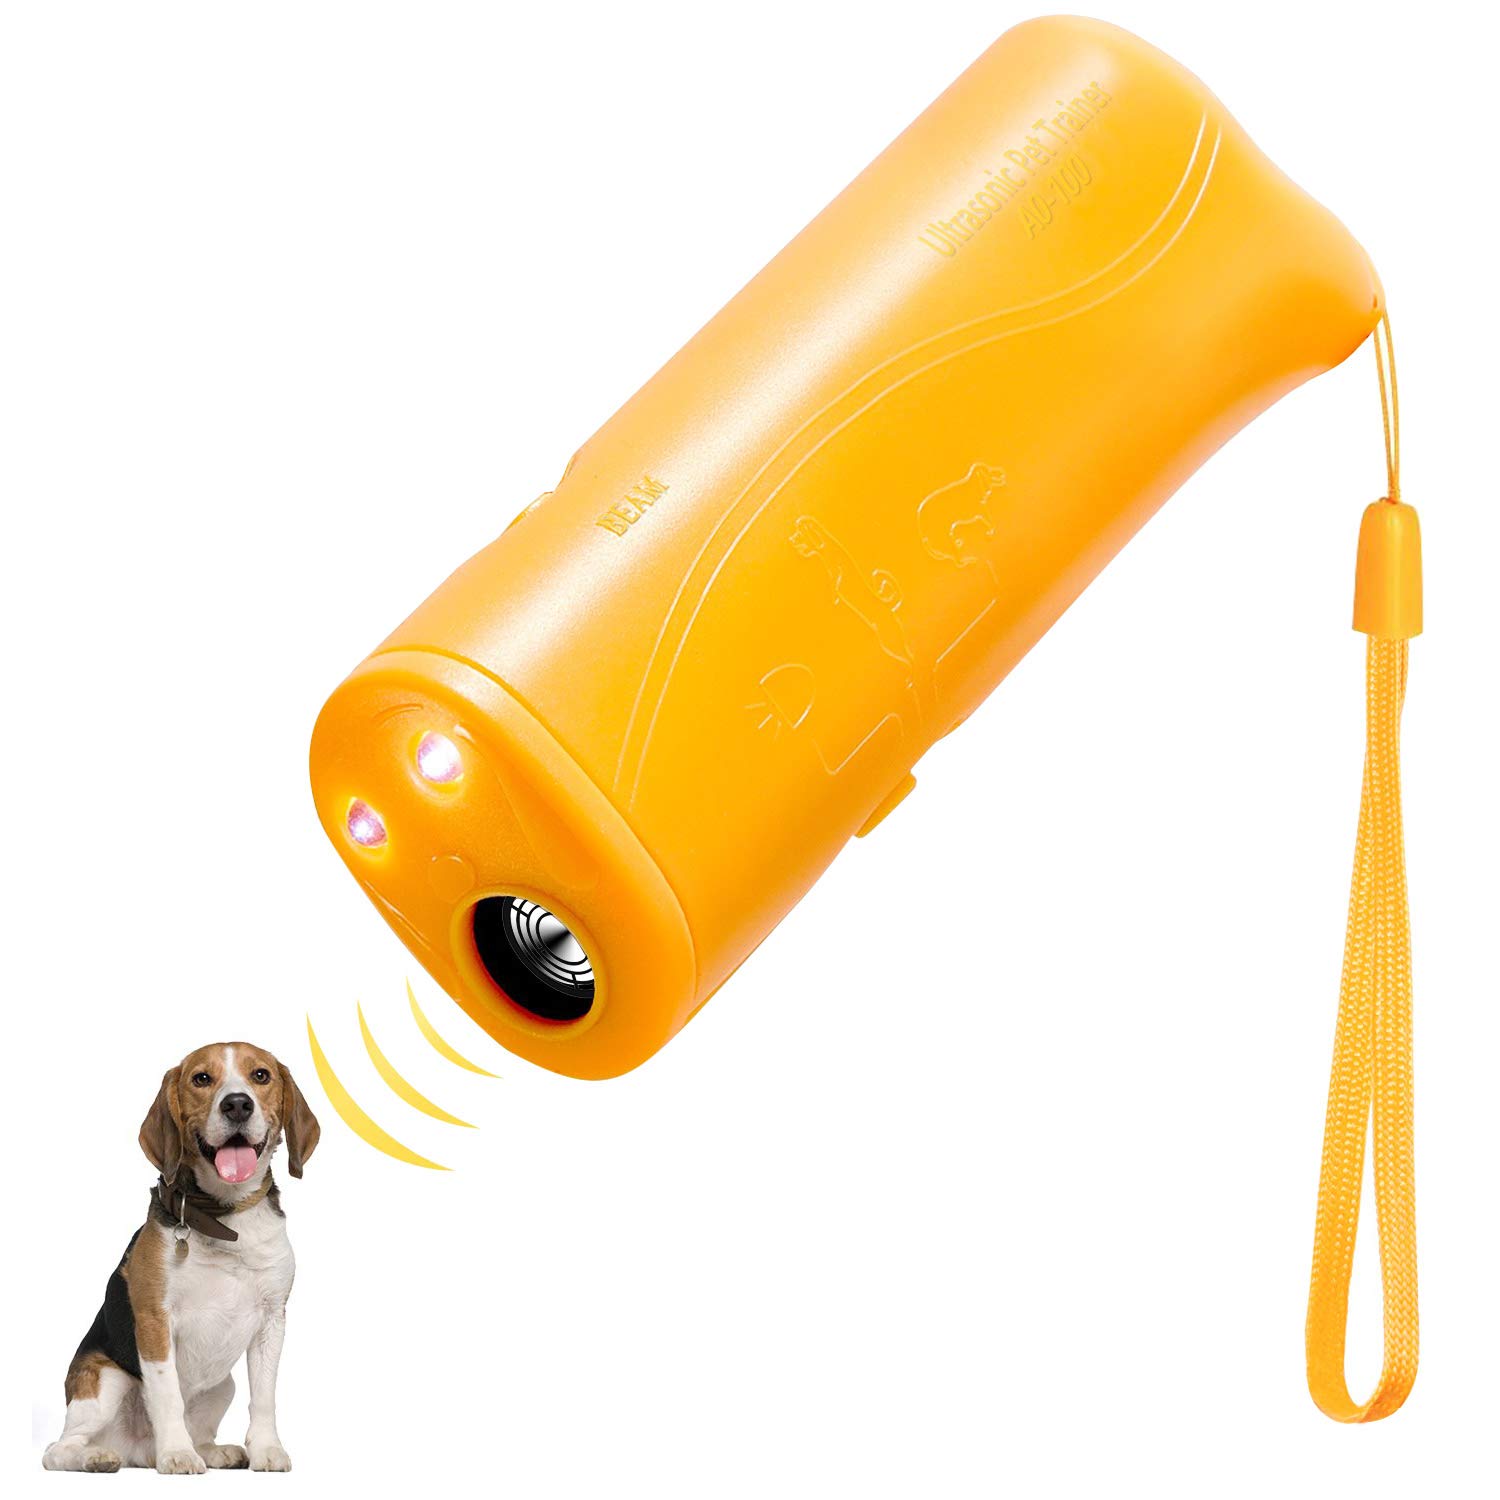 

Handheld Repellent Trainer, 3 in 1 Anti Barking Device with LED Flashlight,Ultrasonic Dog Deterrent and Bark Stopper Trainer